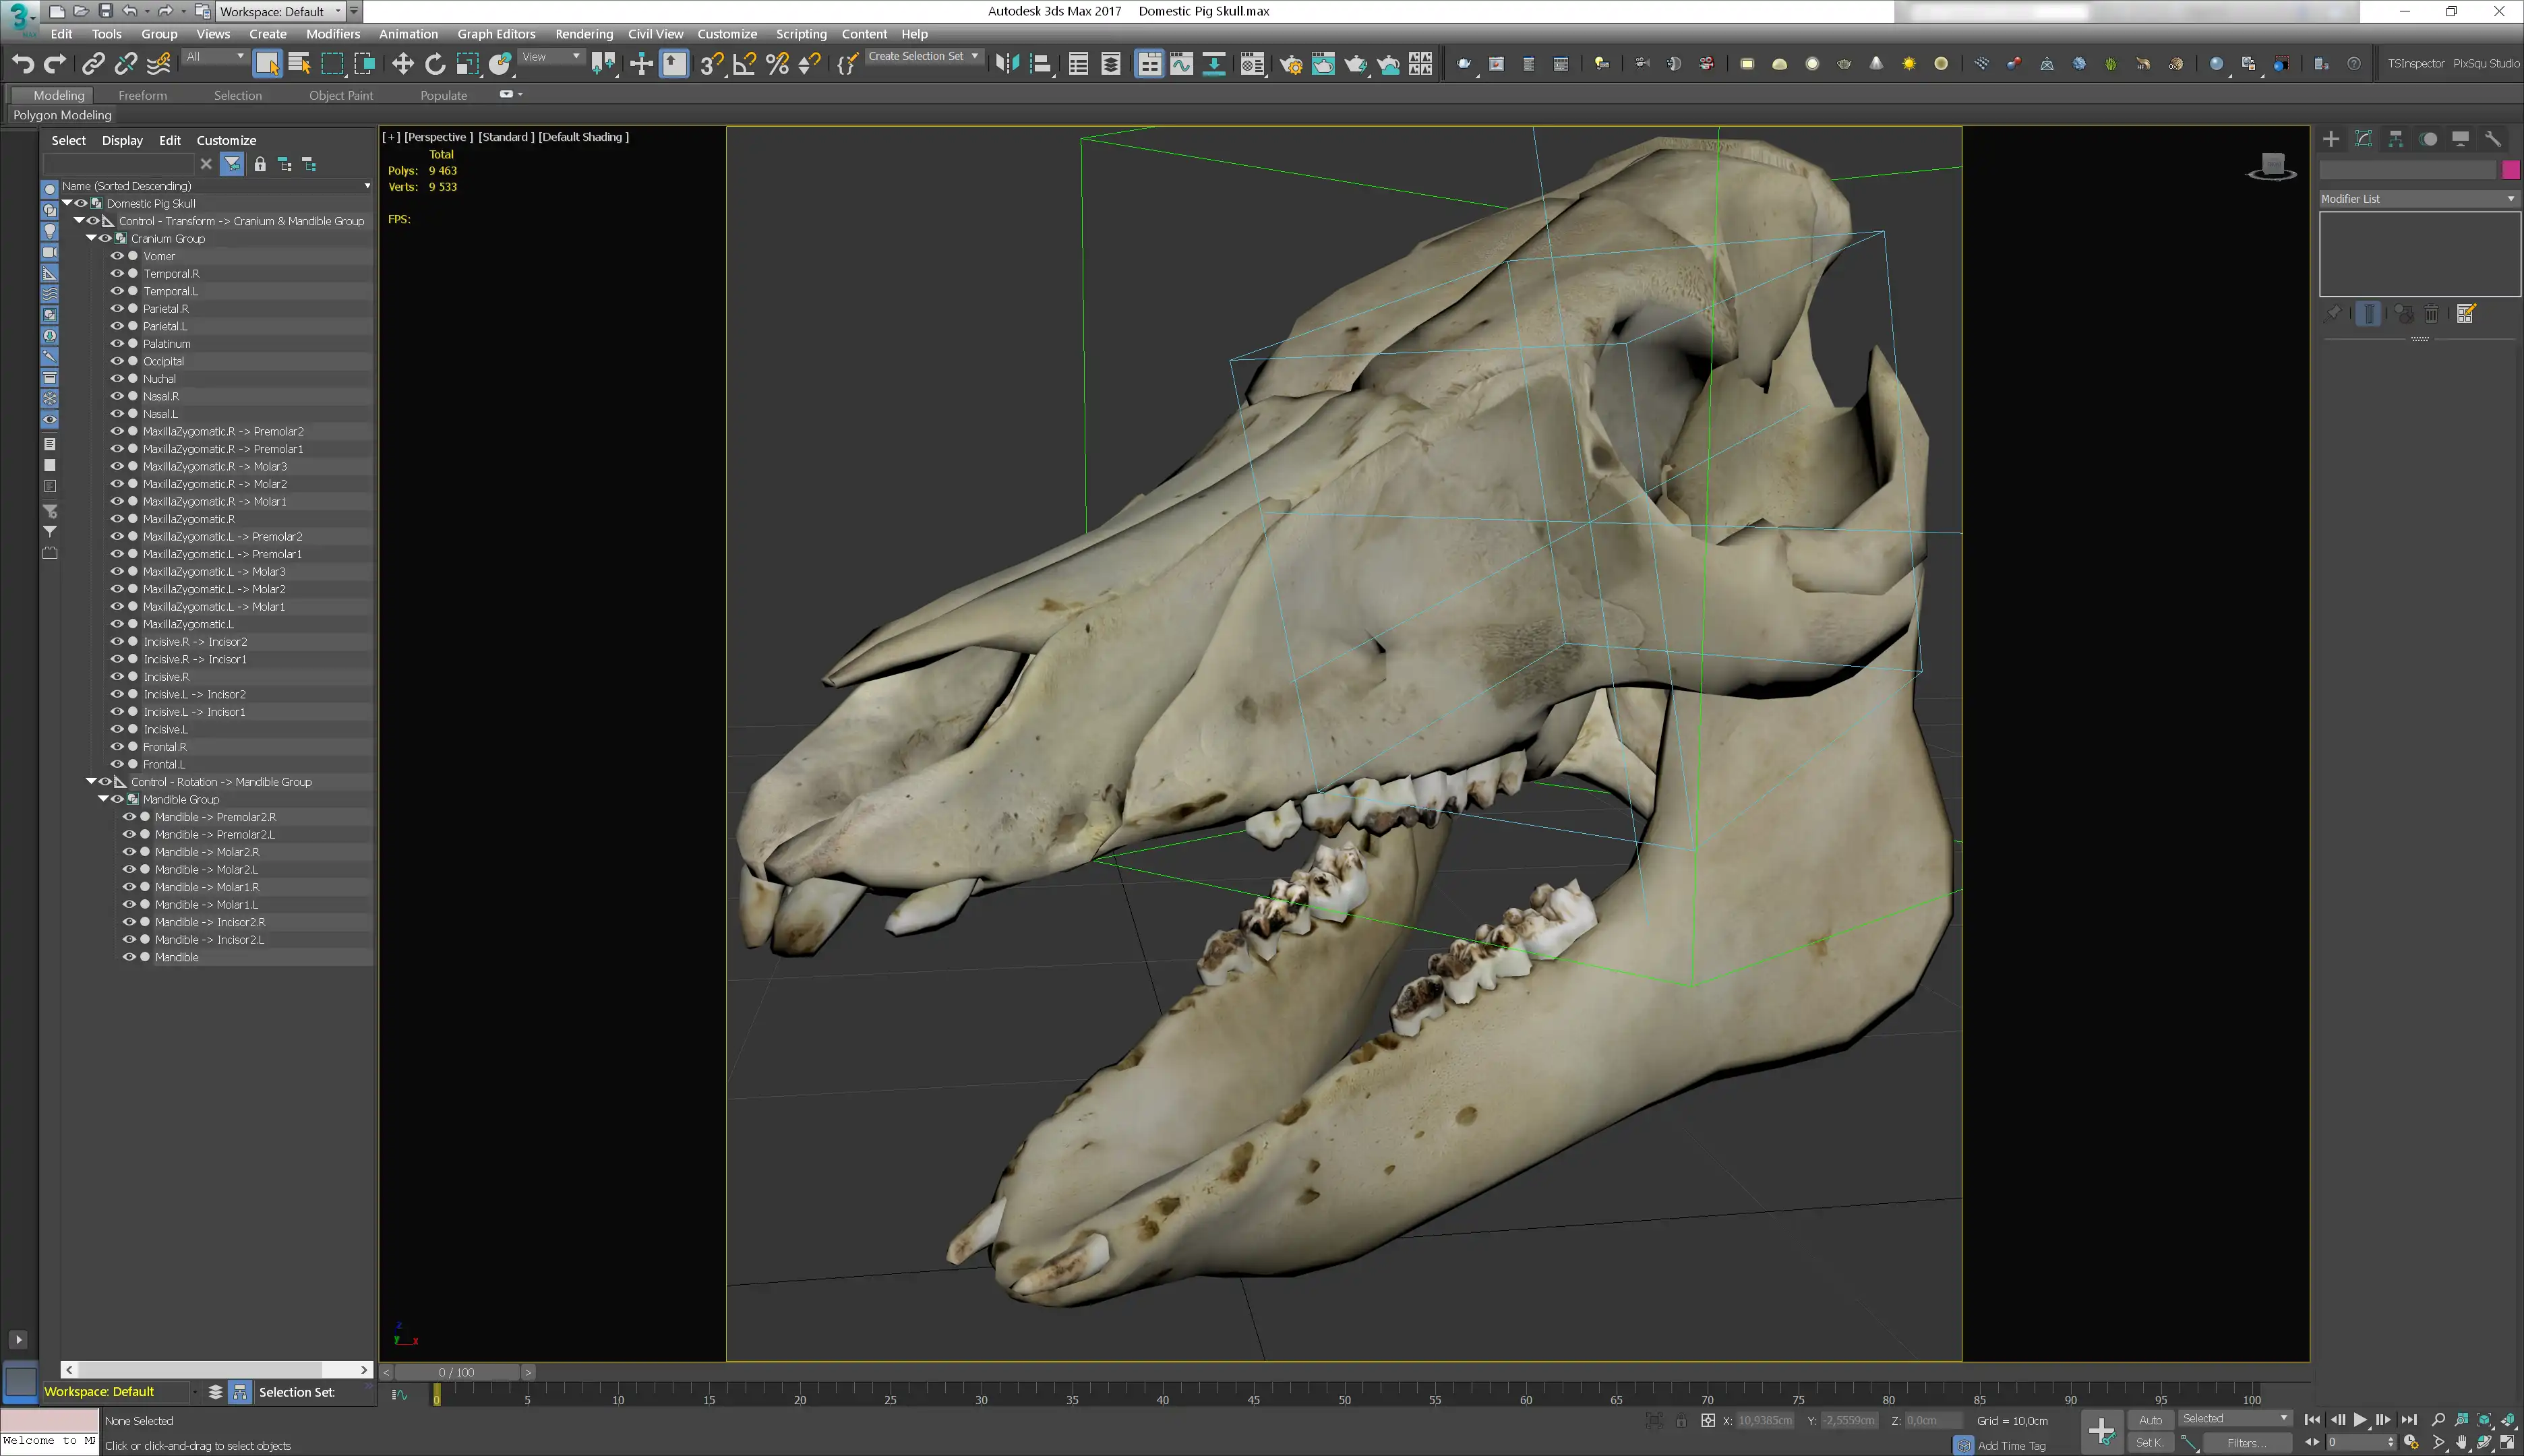 Screenshot of 3ds Max 2017 user interface with pig skull 3d model asset opened.